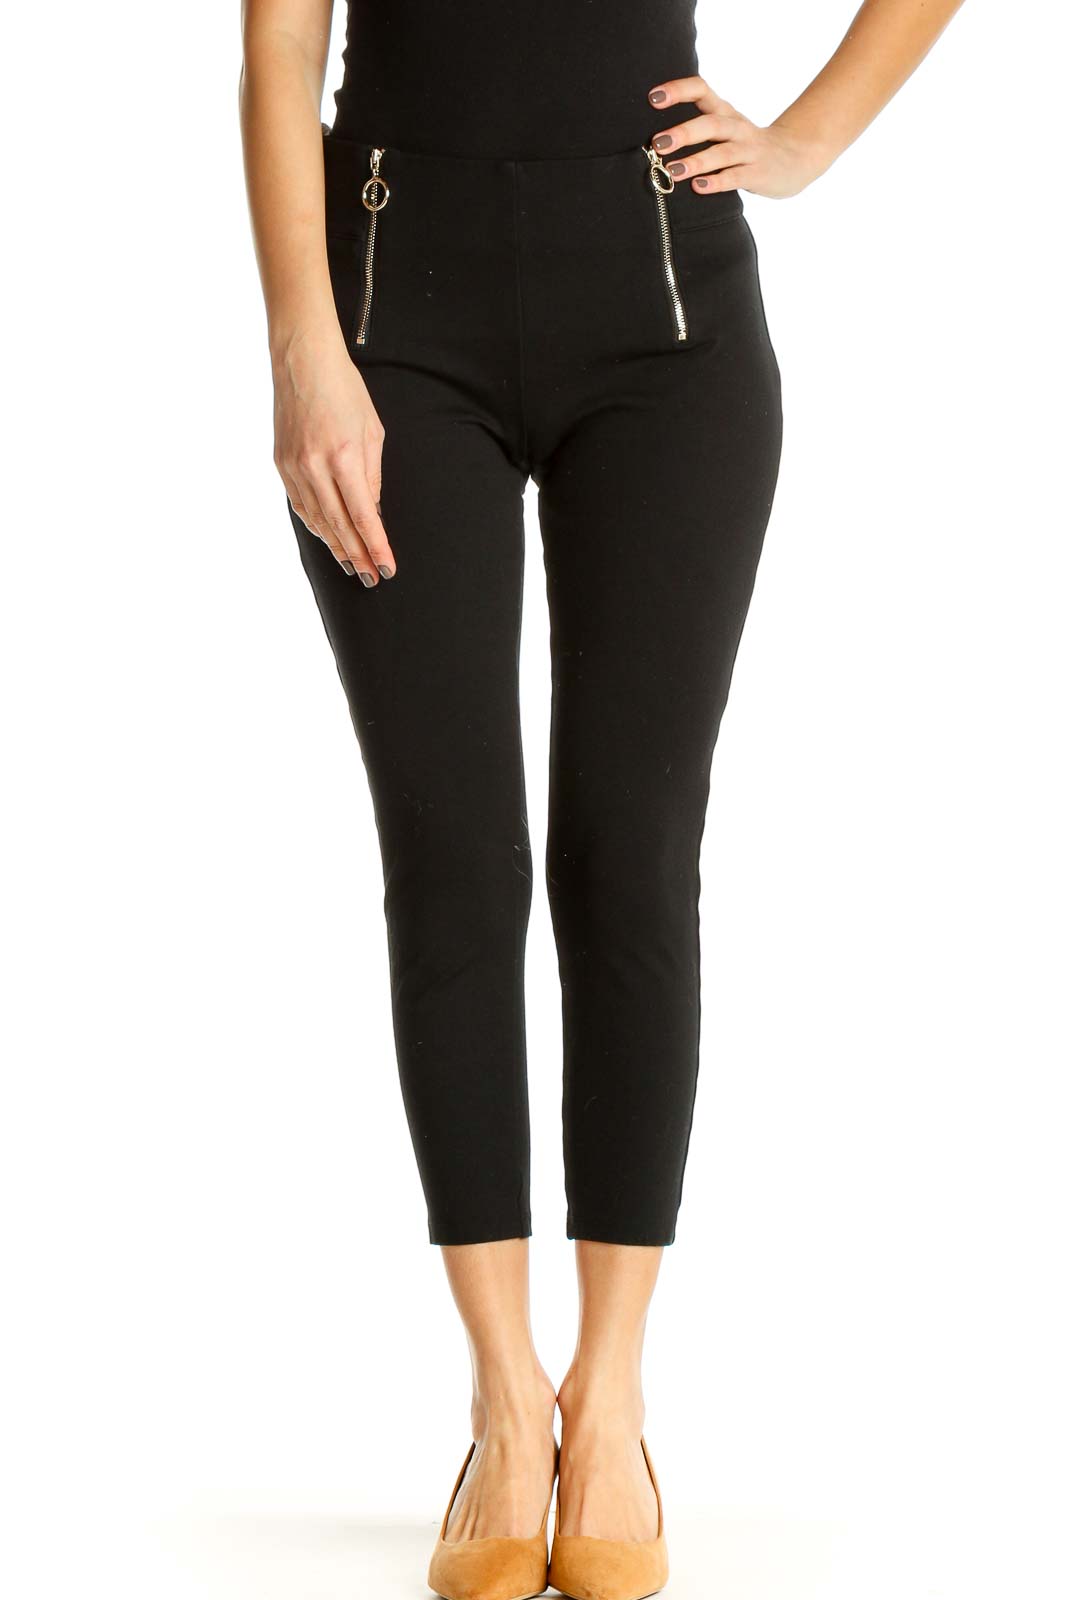 Black Solid Casual Leggings Front